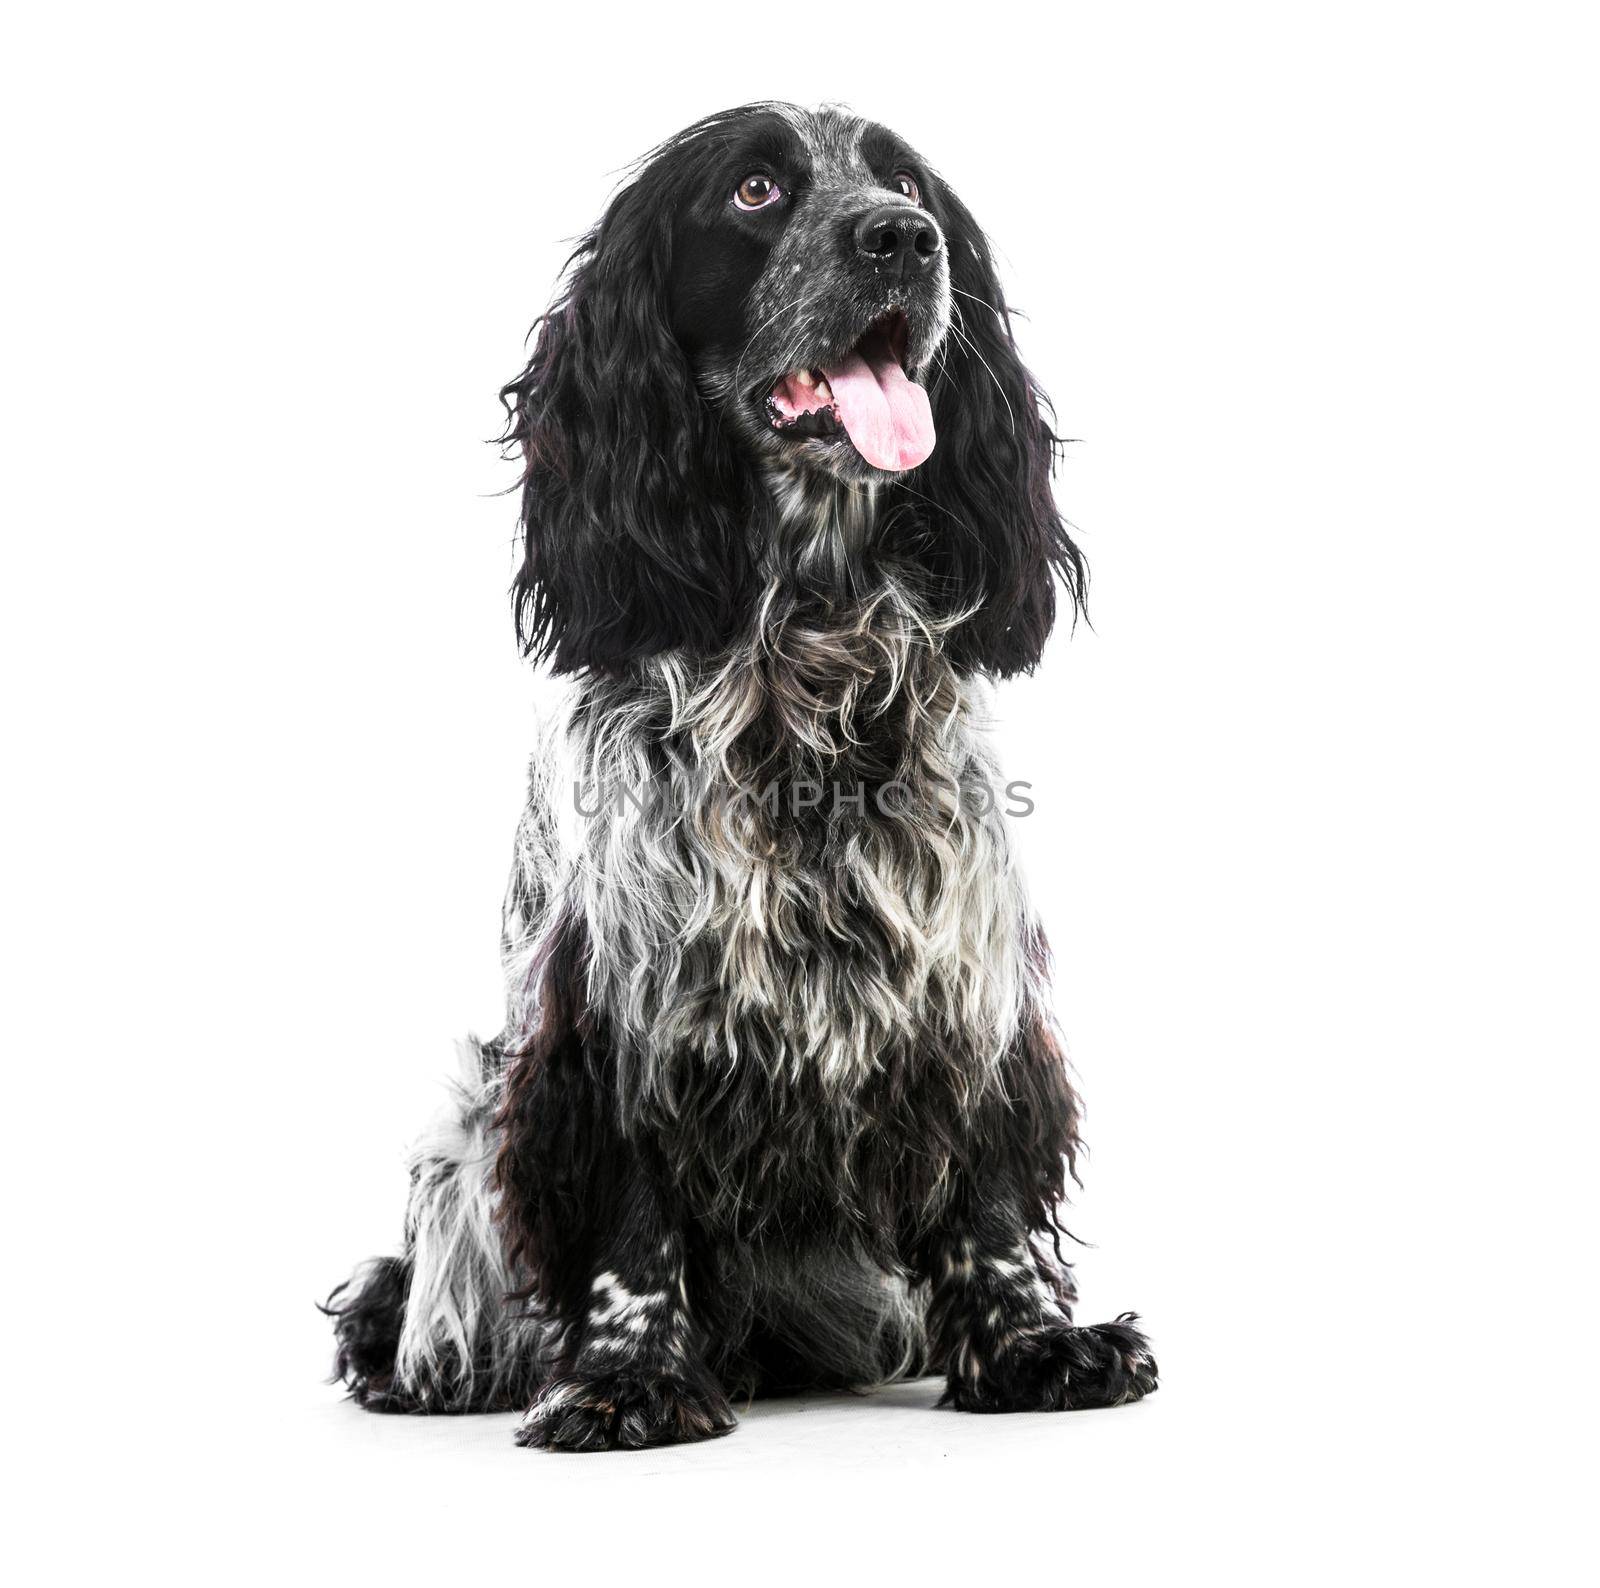 Cocker Spaniel puppy dog isolated on a white background